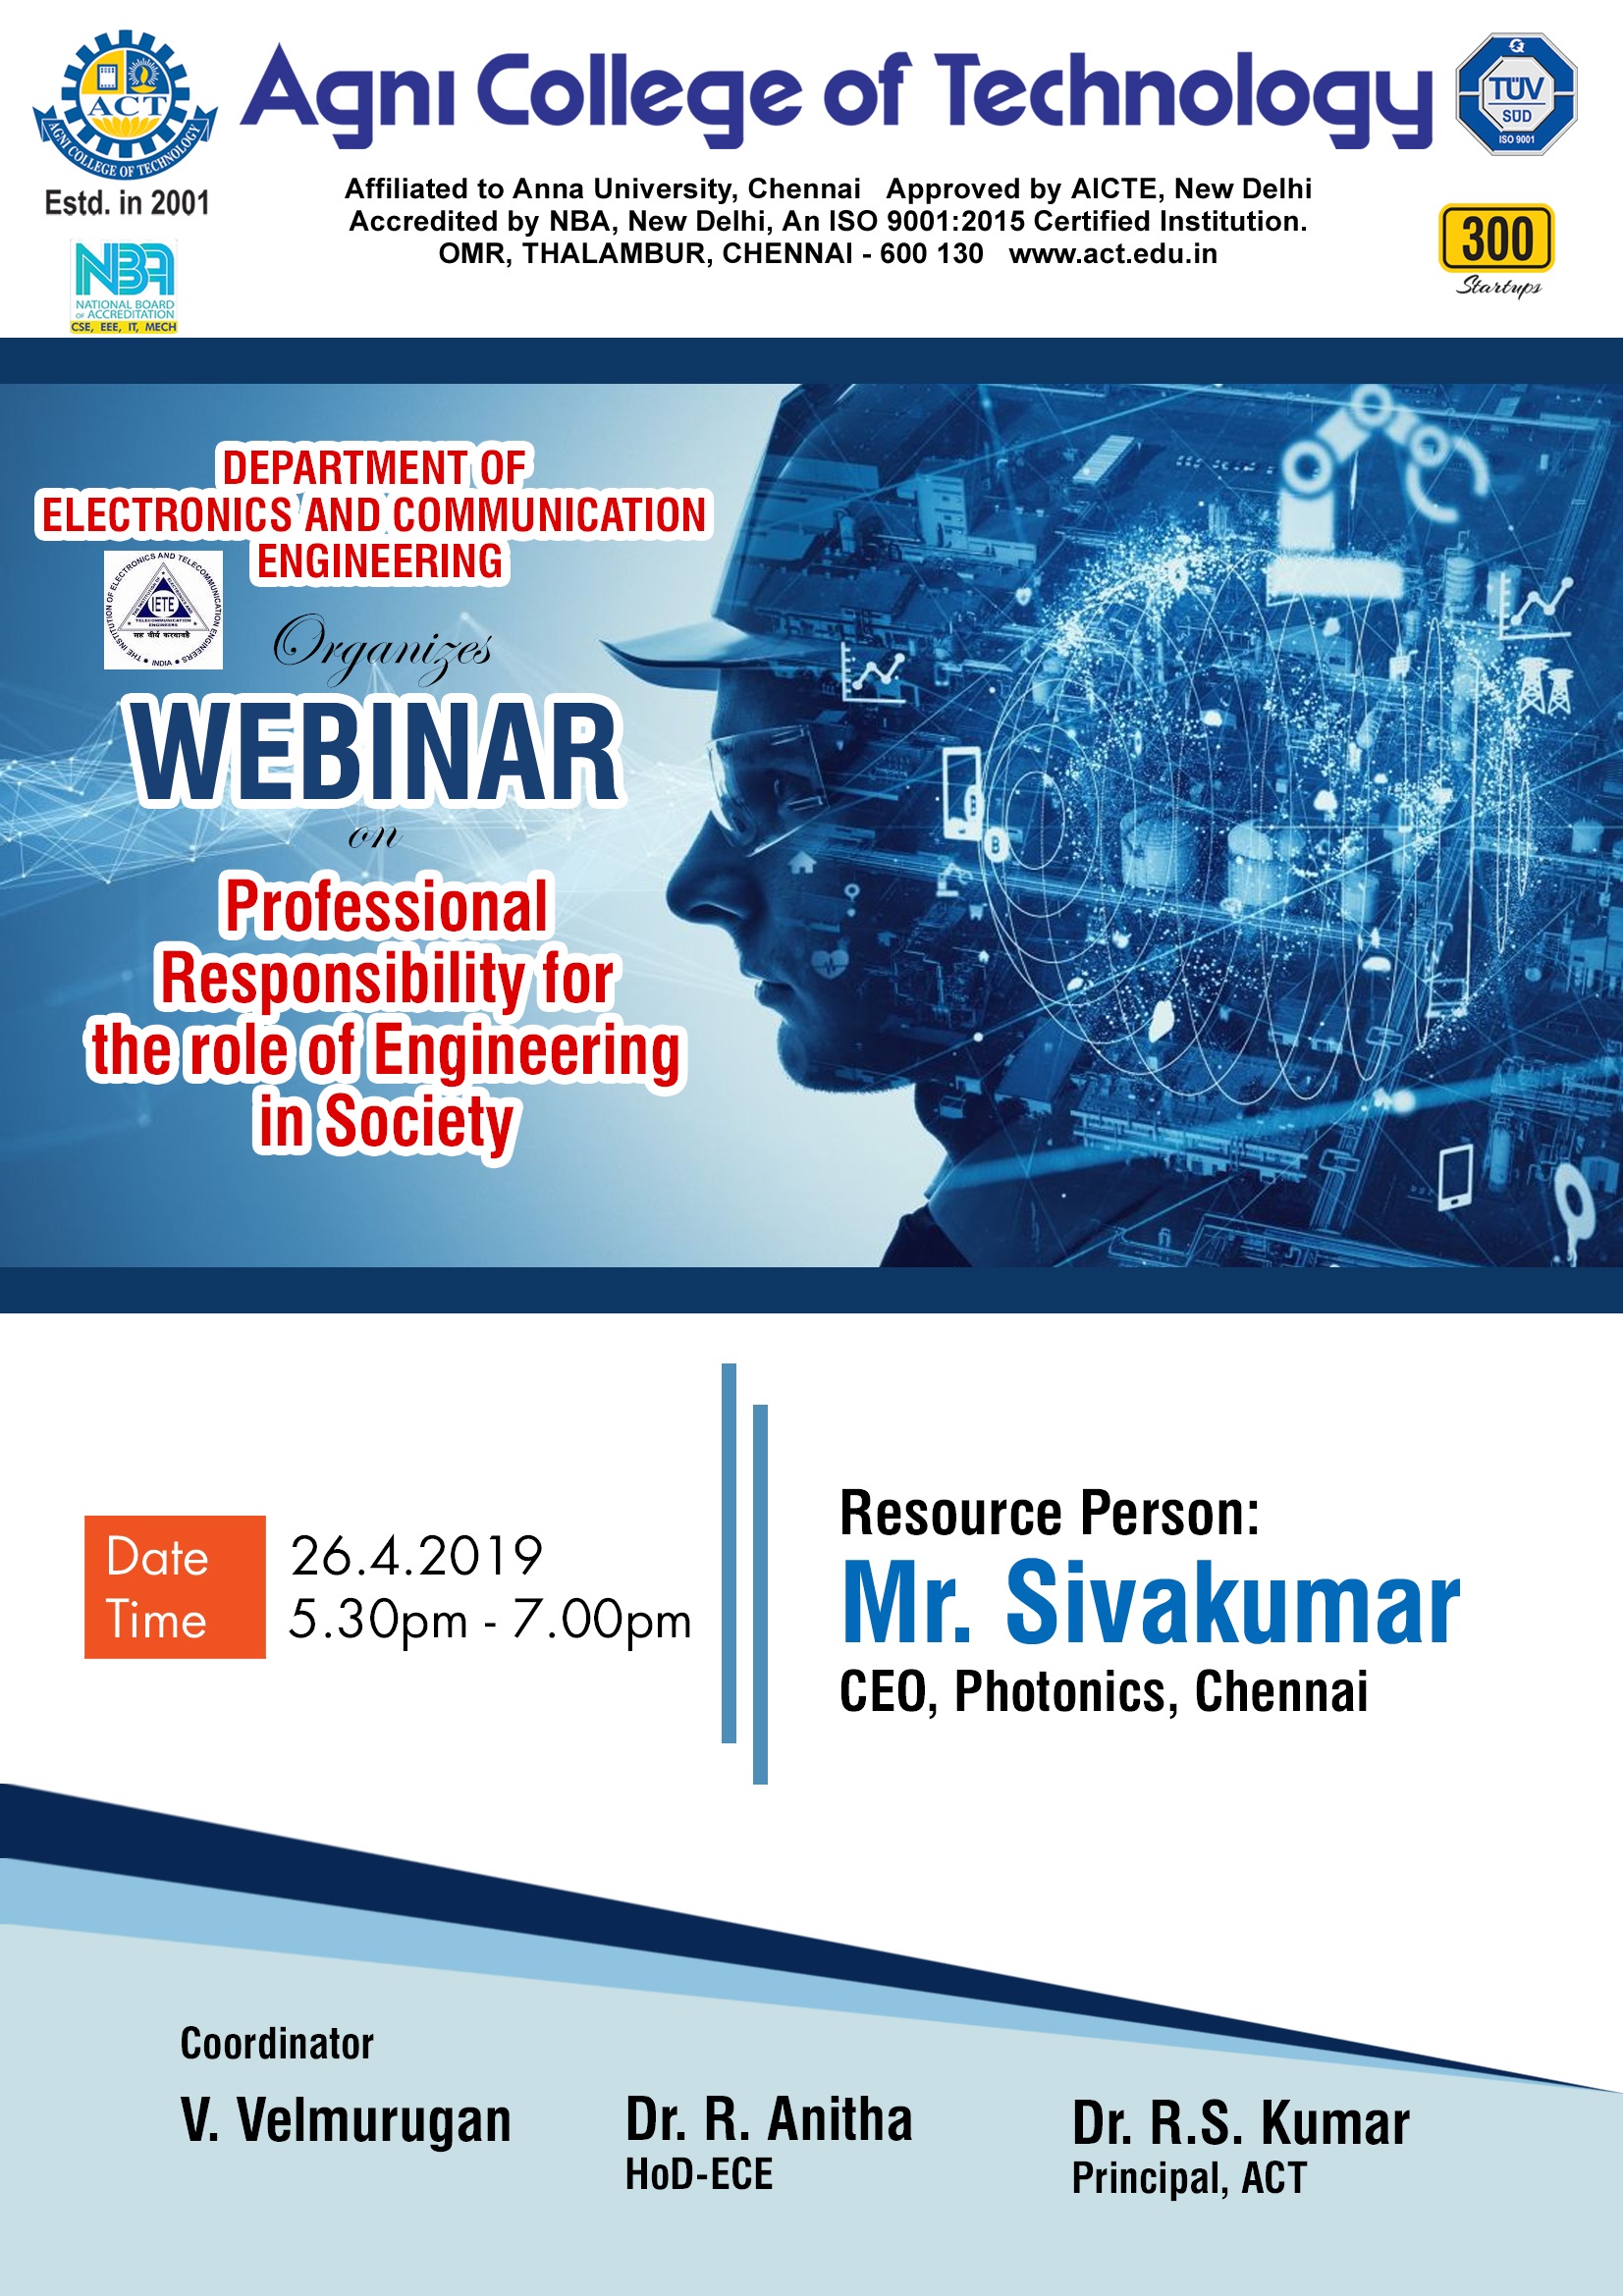 Webinar on Professional Responsibility for the Role of Engineering in Society